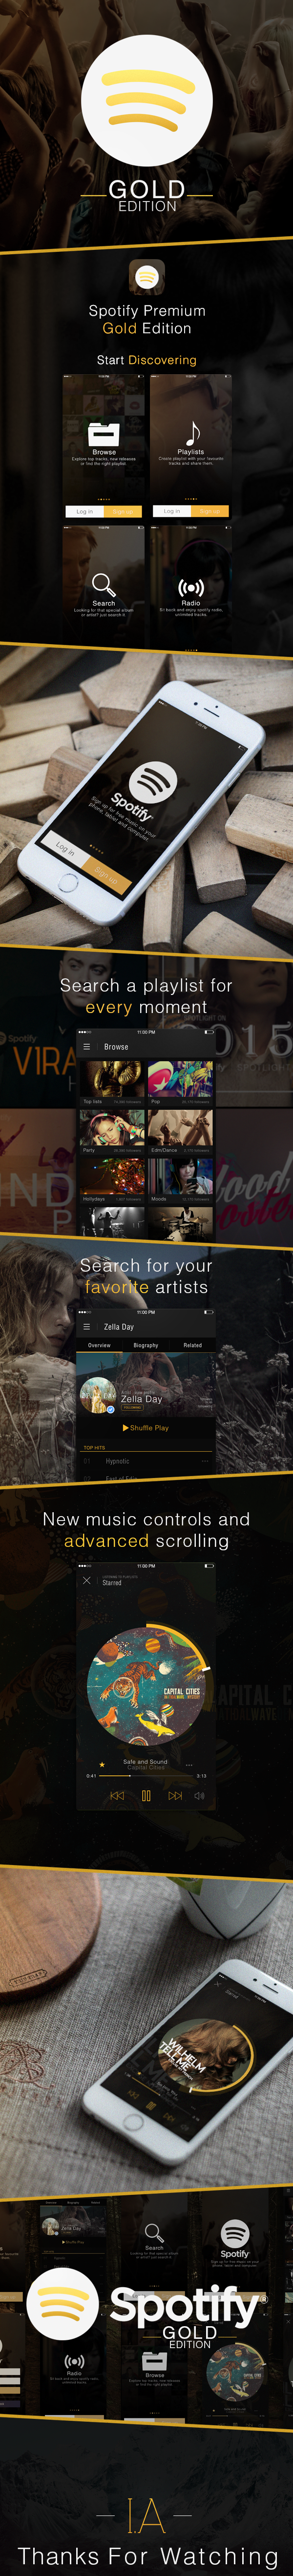 app apps design UI ux photoshop spotify gold edition